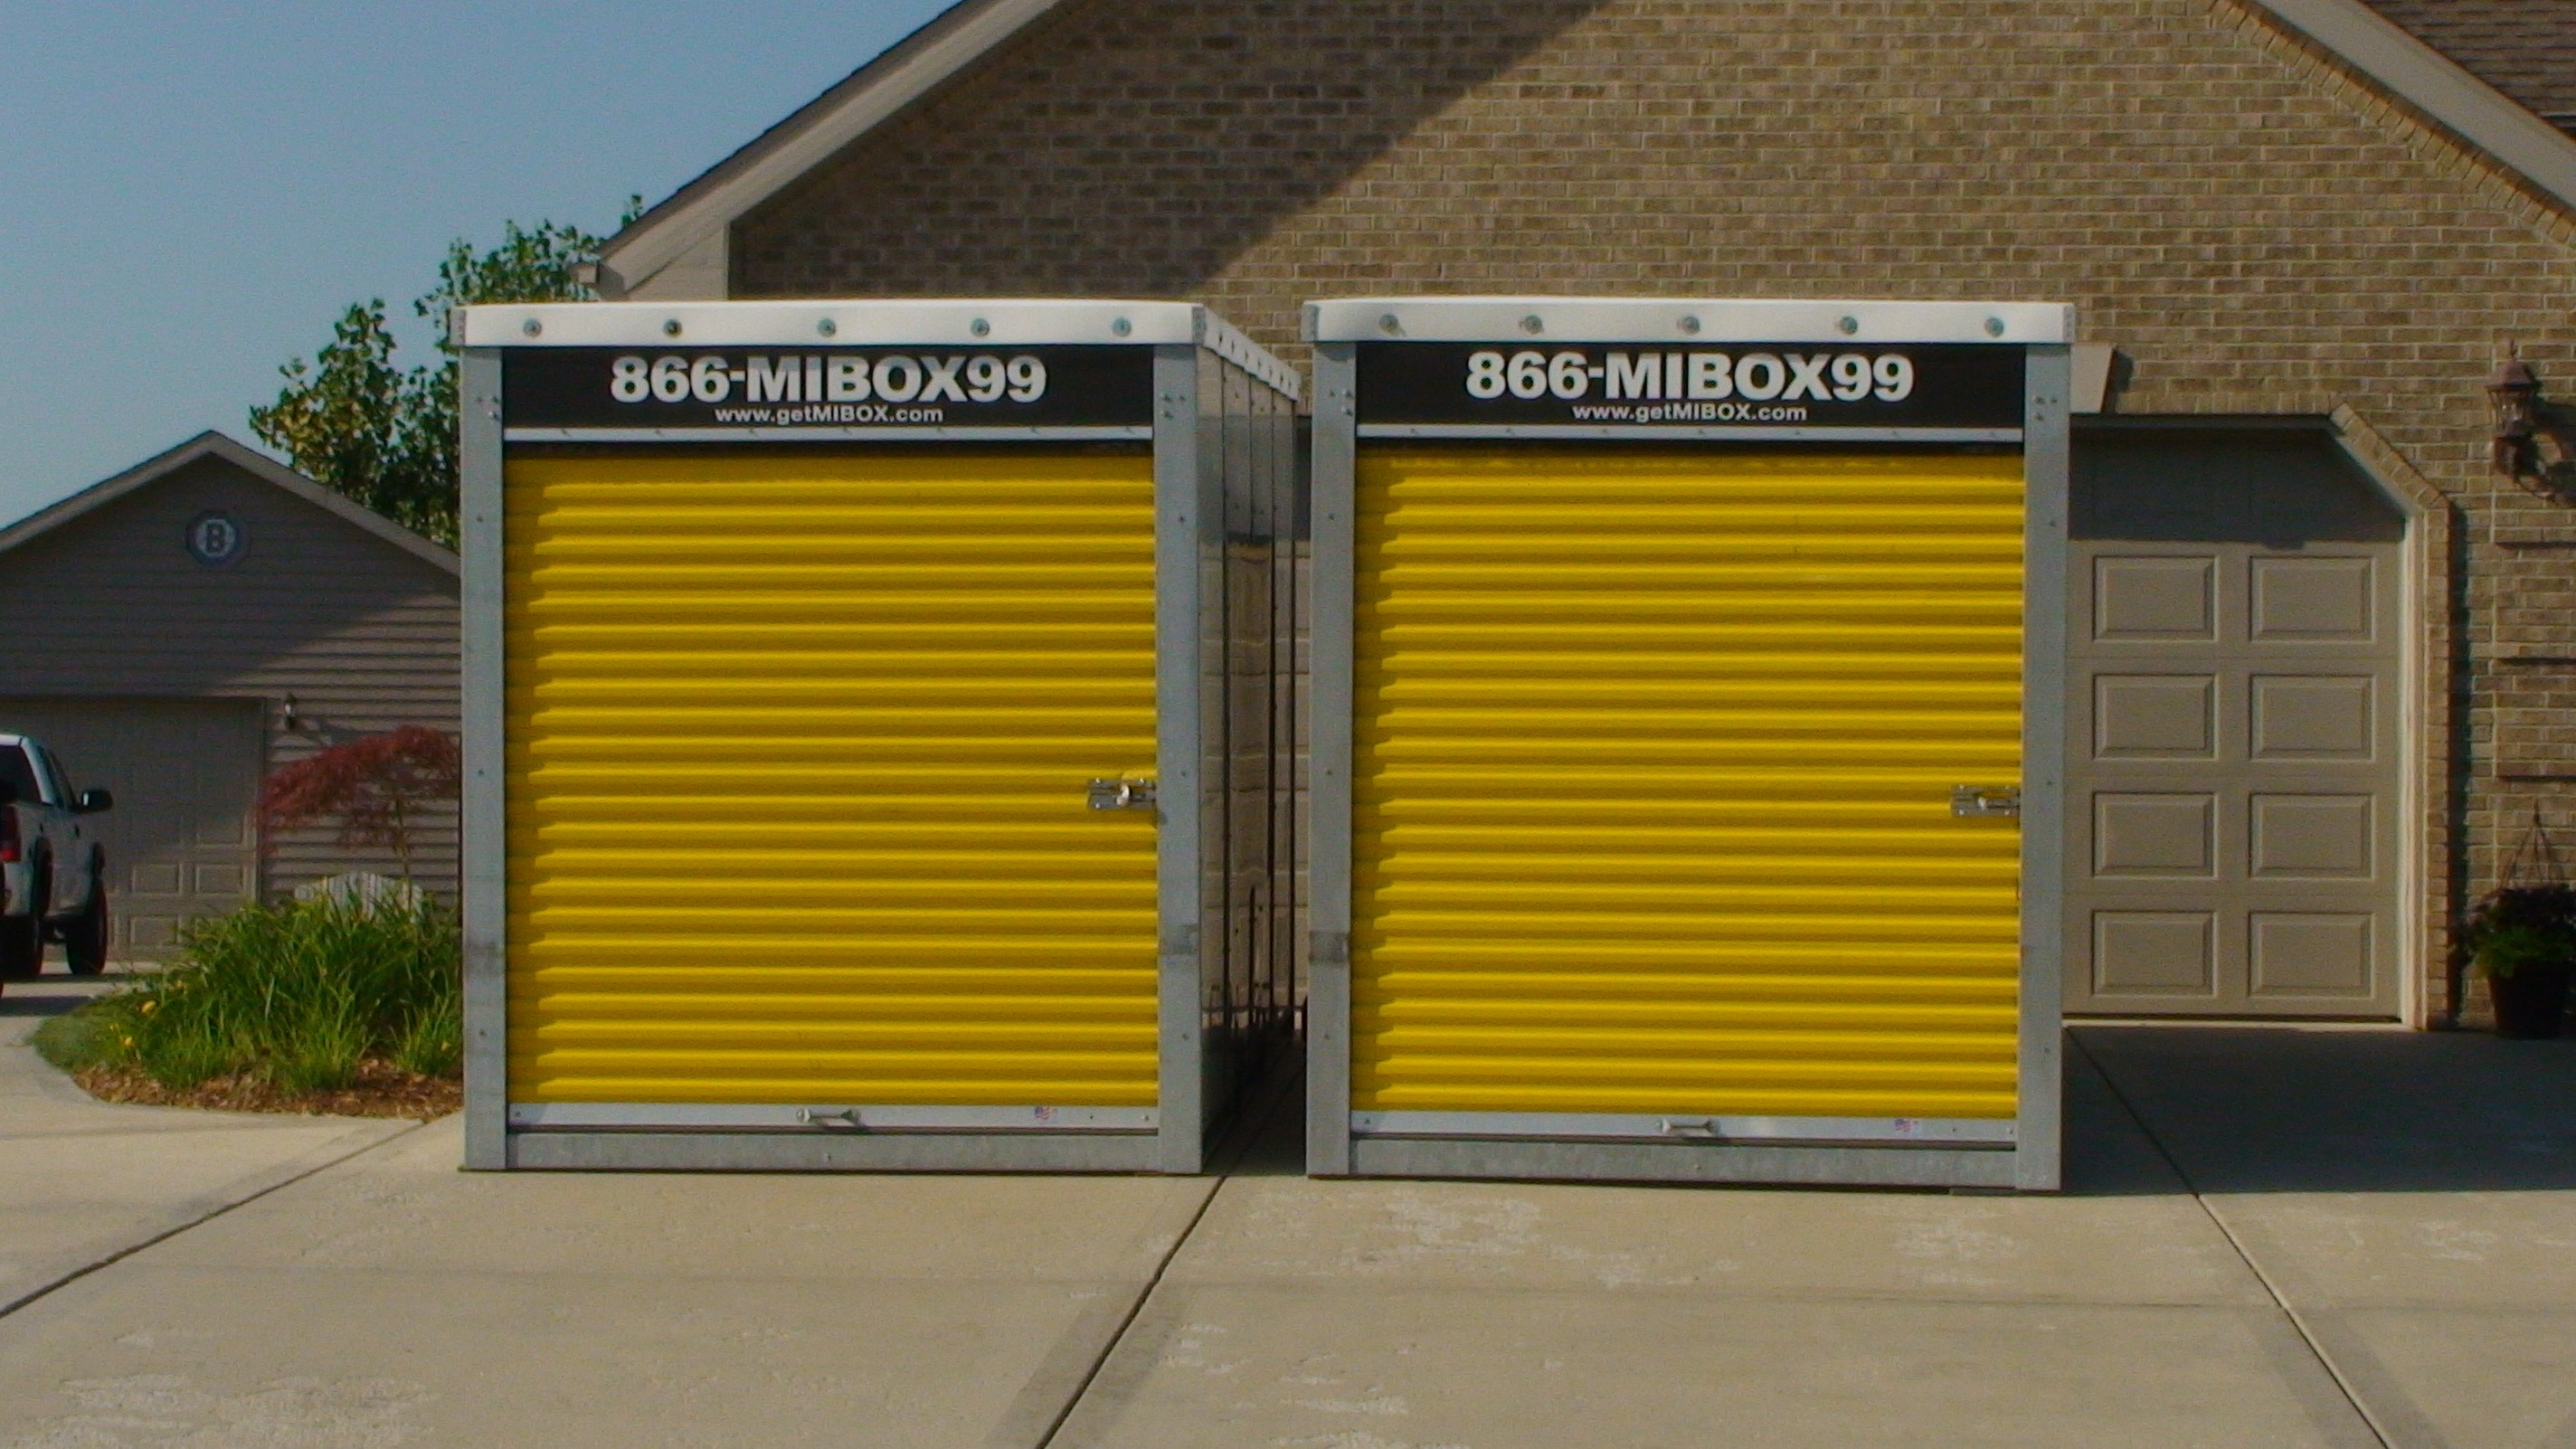 Two MI-BOX portable storage containers side-by-side in a driveway